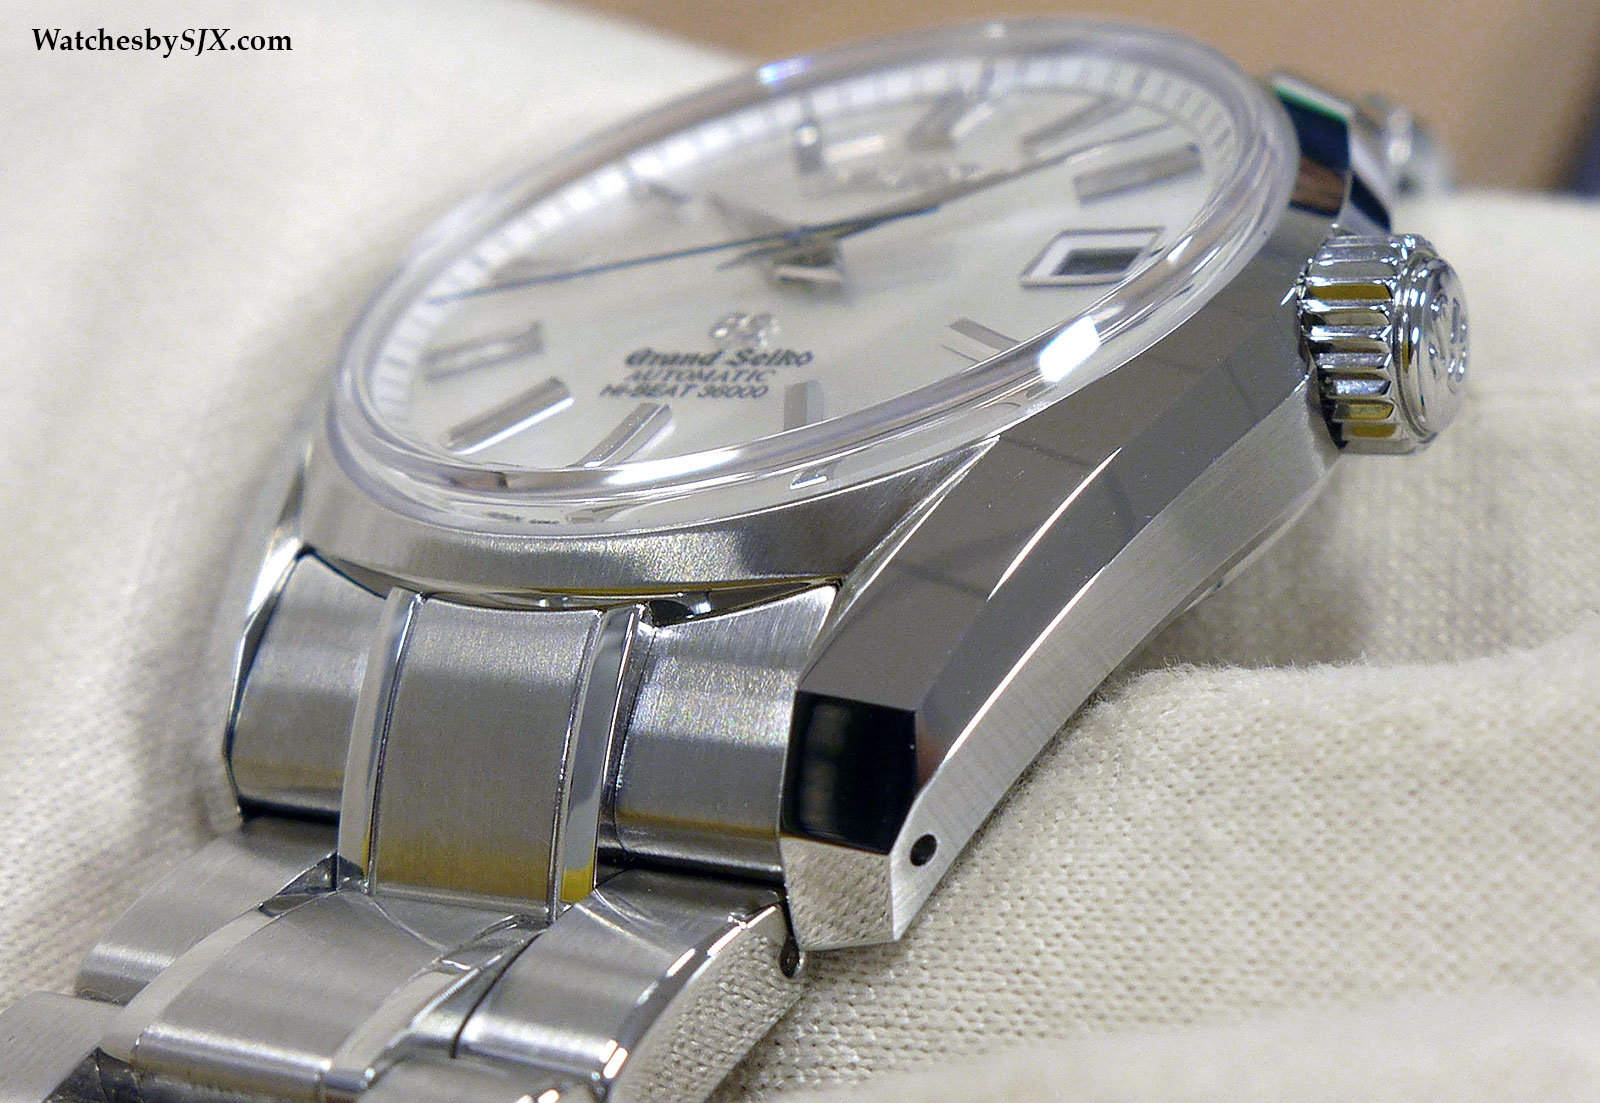 Hands-On With The Seiko 62GS Spring Drive And Hi-Beat Limited Editions  (With Original Photos & Price) | SJX Watches